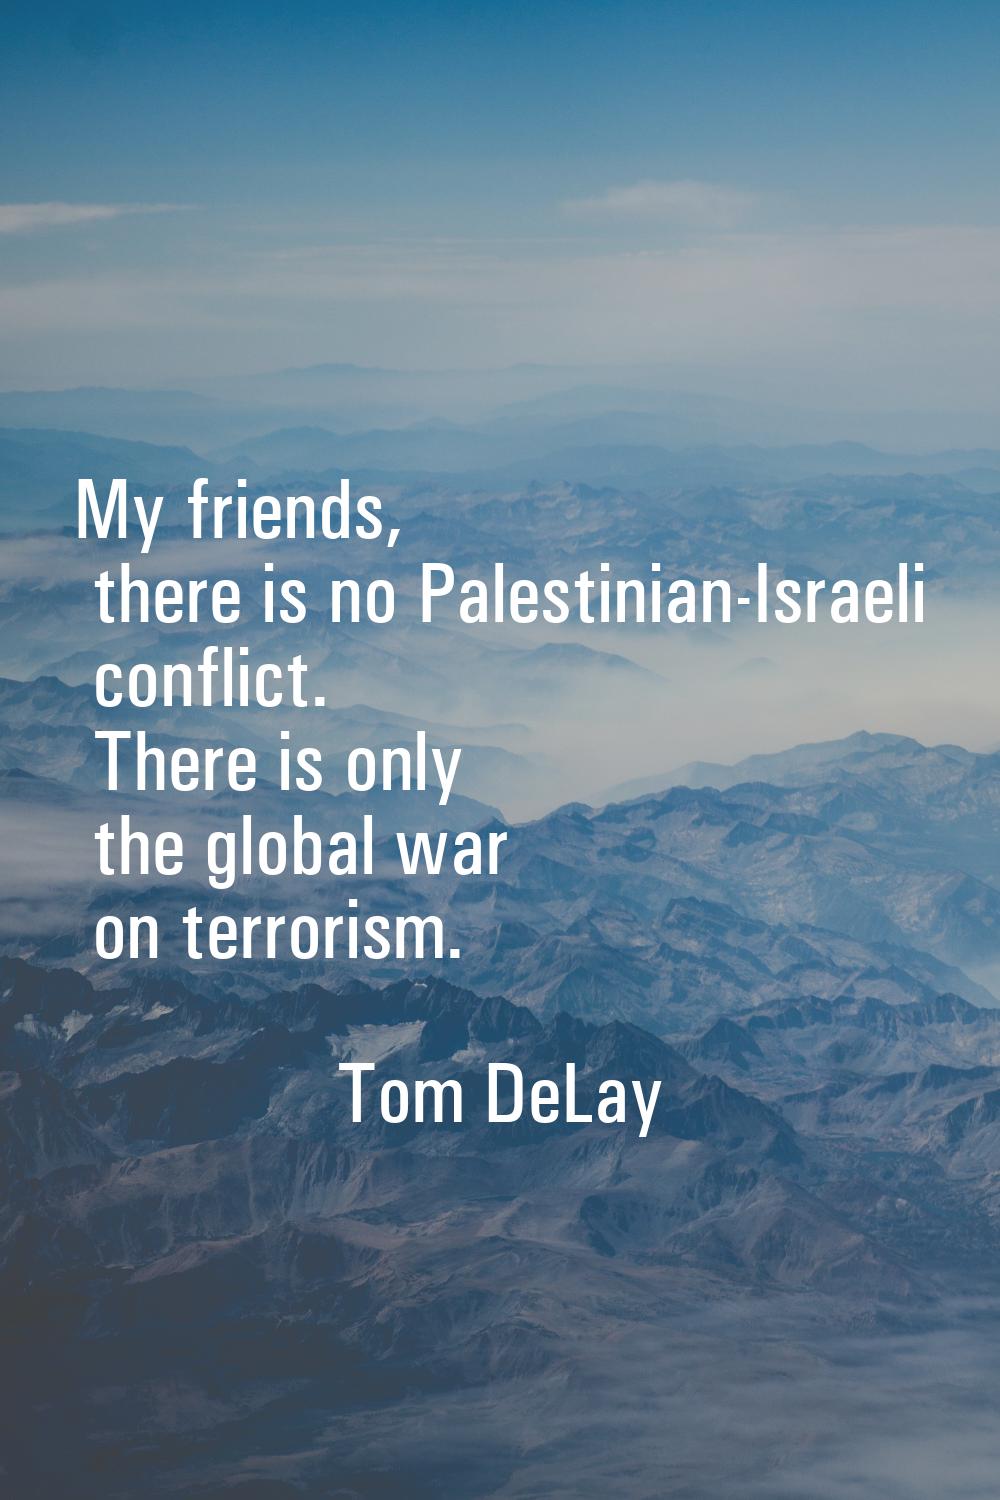 My friends, there is no Palestinian-Israeli conflict. There is only the global war on terrorism.